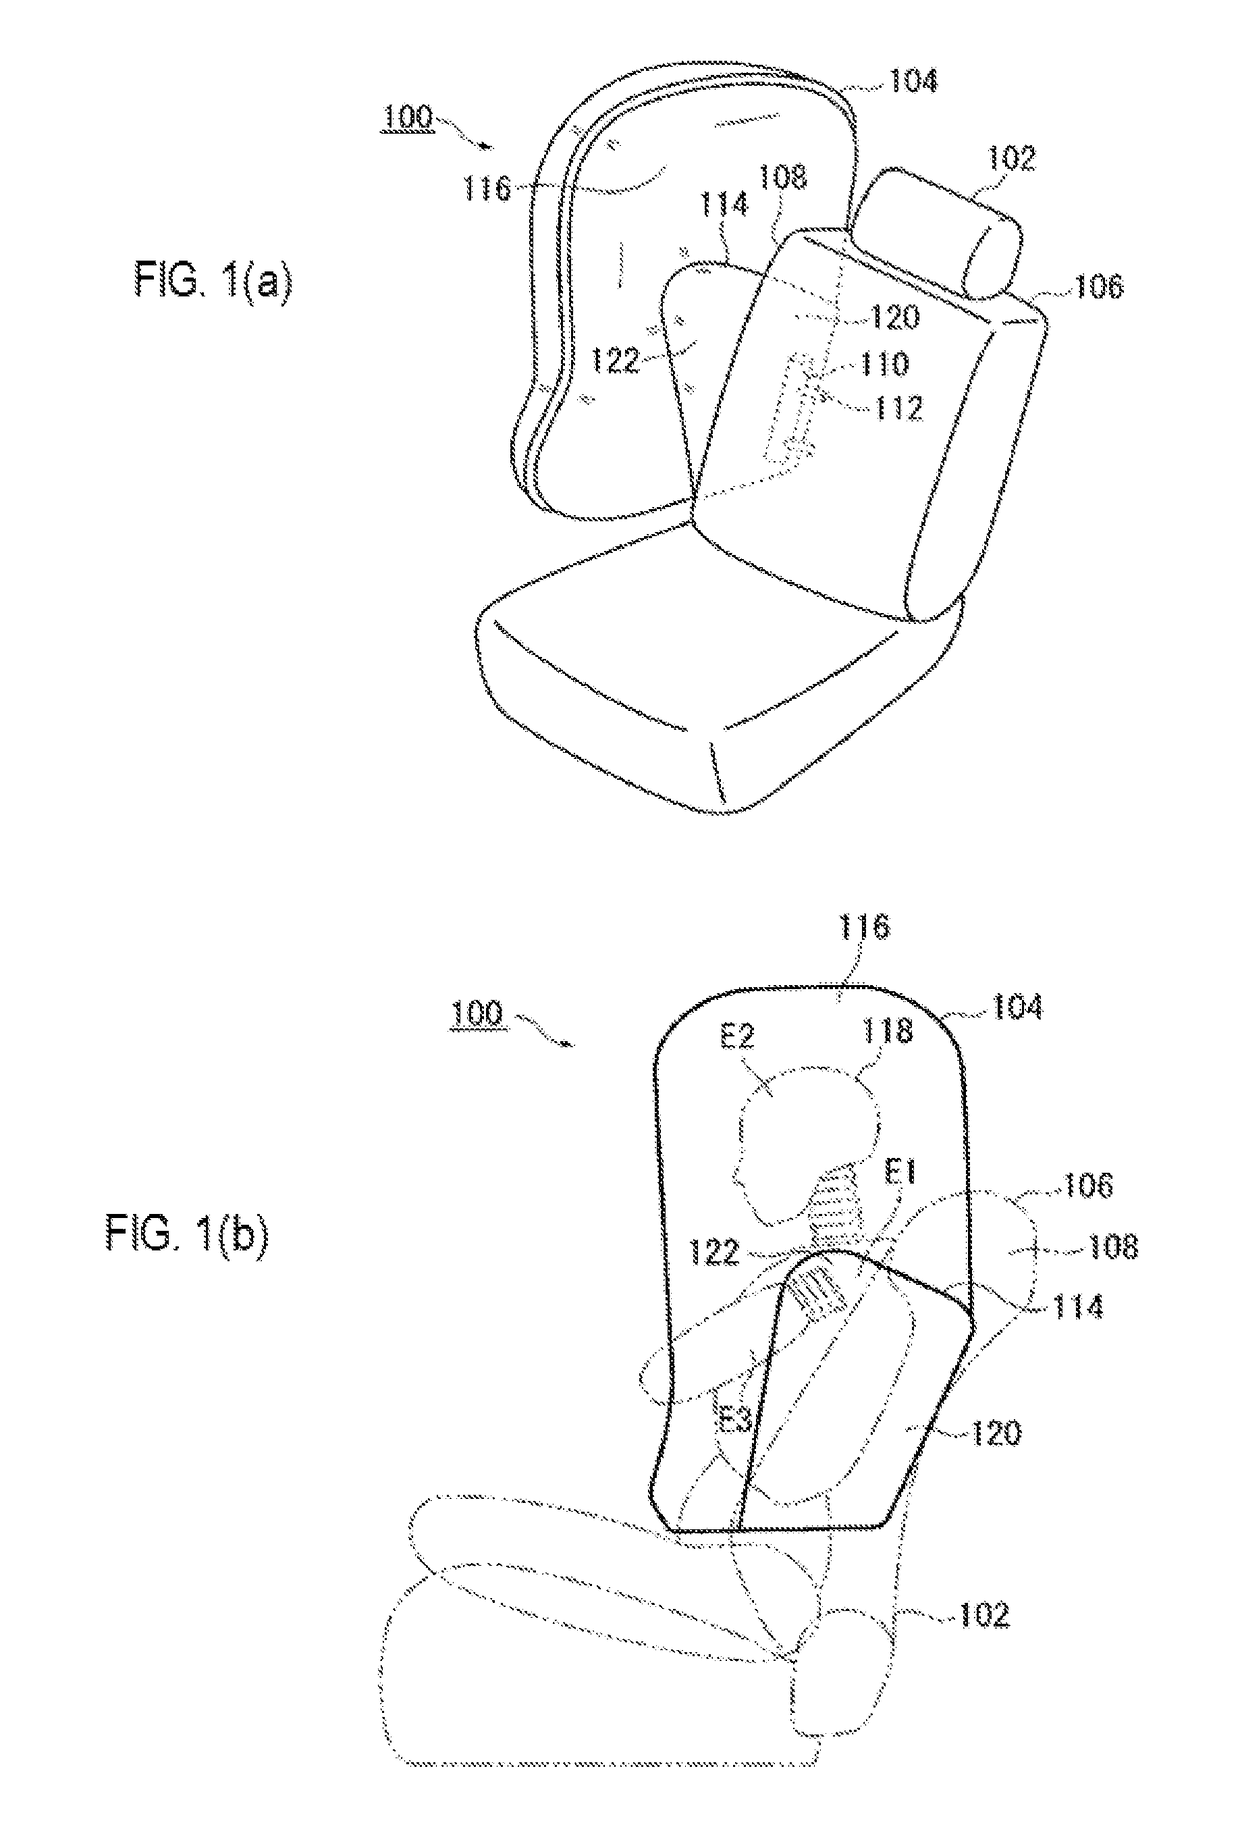 Side airbag device